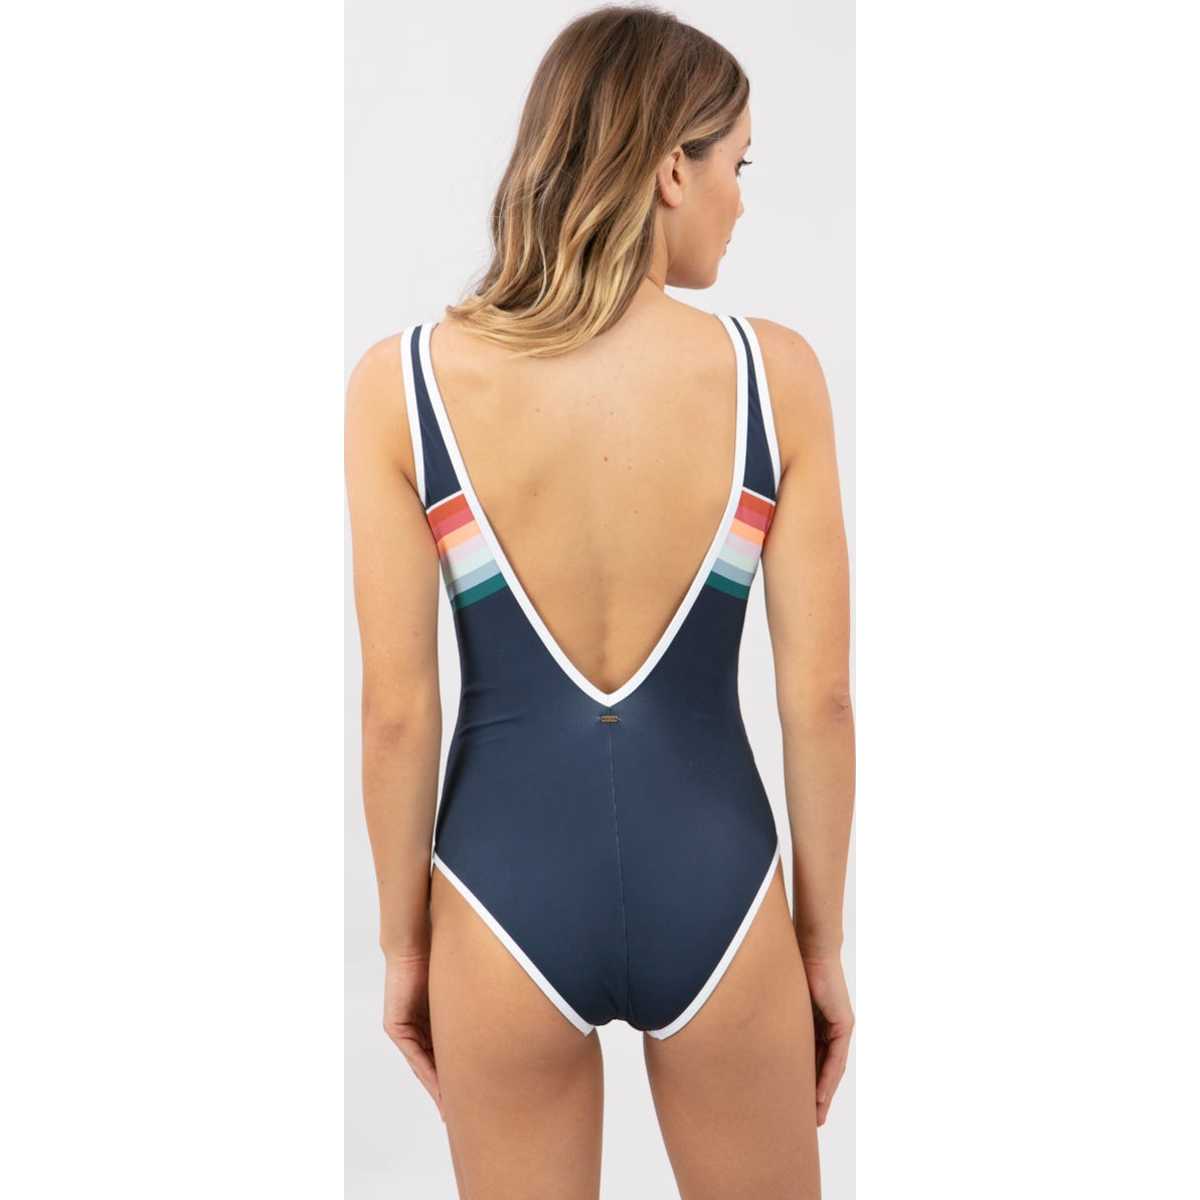 Periscope Surf Swimsuit One-piece in Black